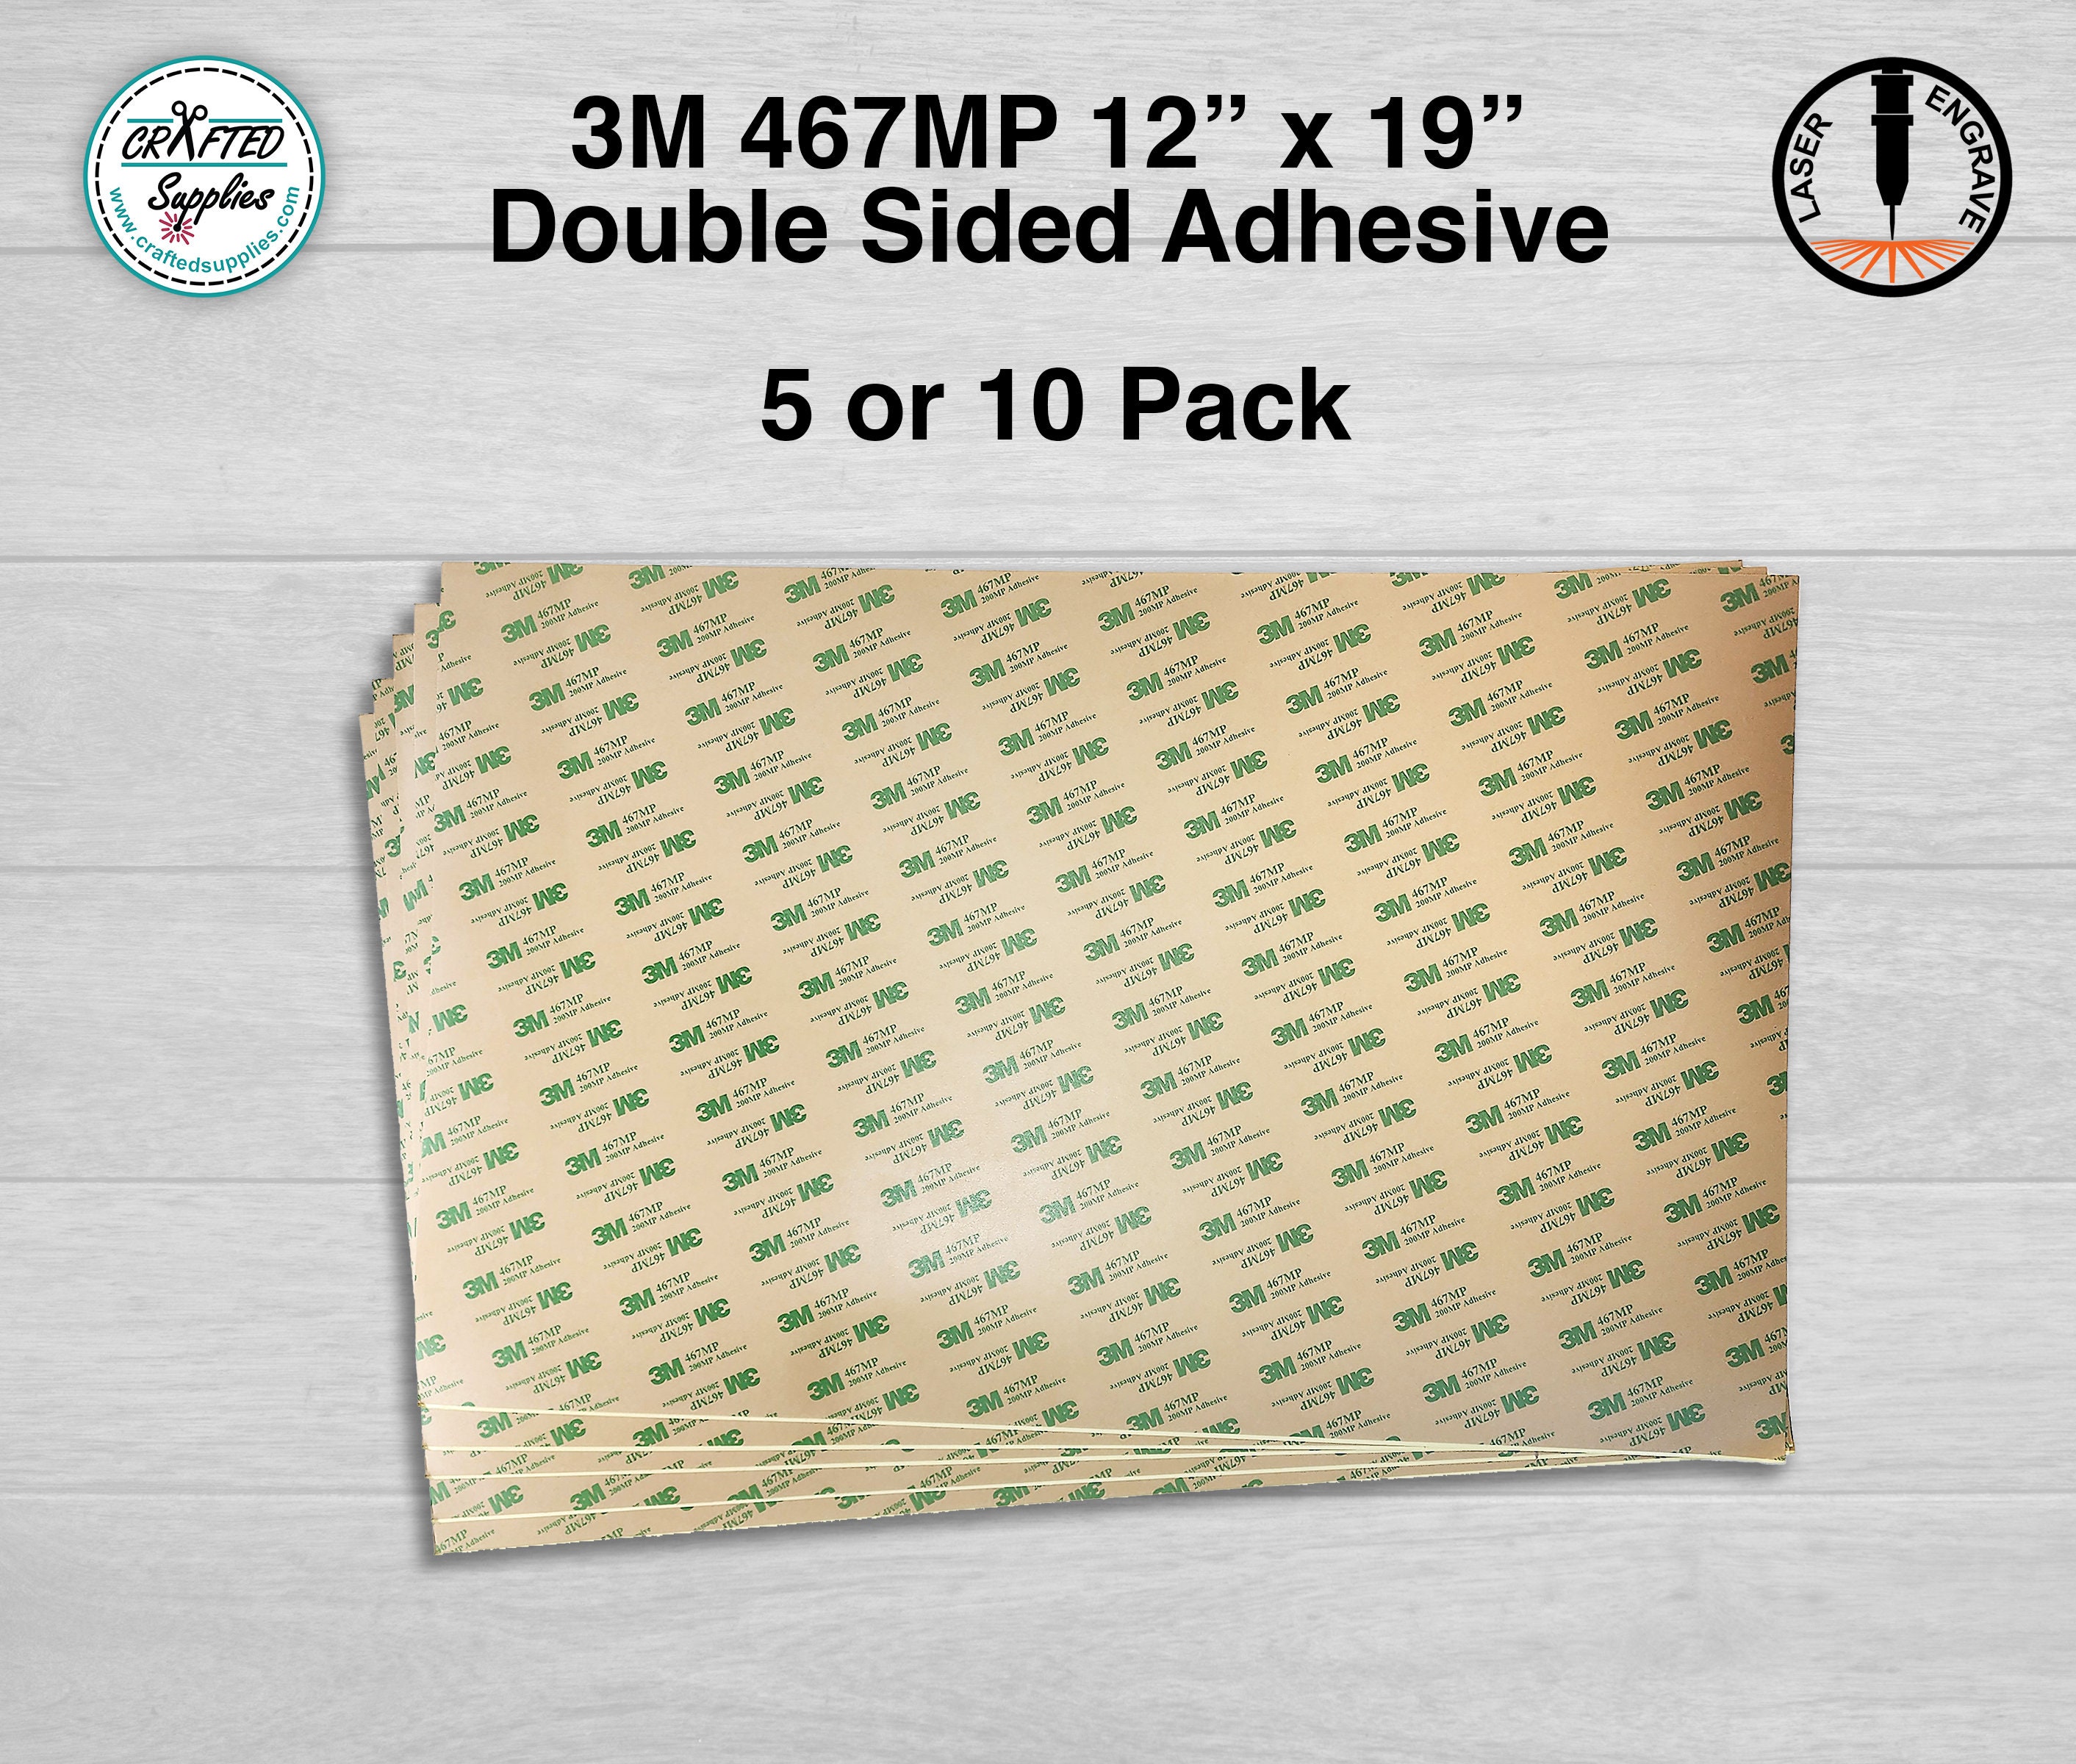 Pack 3 Sheets 8.5x11 3M 300LSE 9495LE Double Sided Strong Adhesive  Transparent Clear, for Glass, Plastics, Metals, Cellphone Screen Repair 